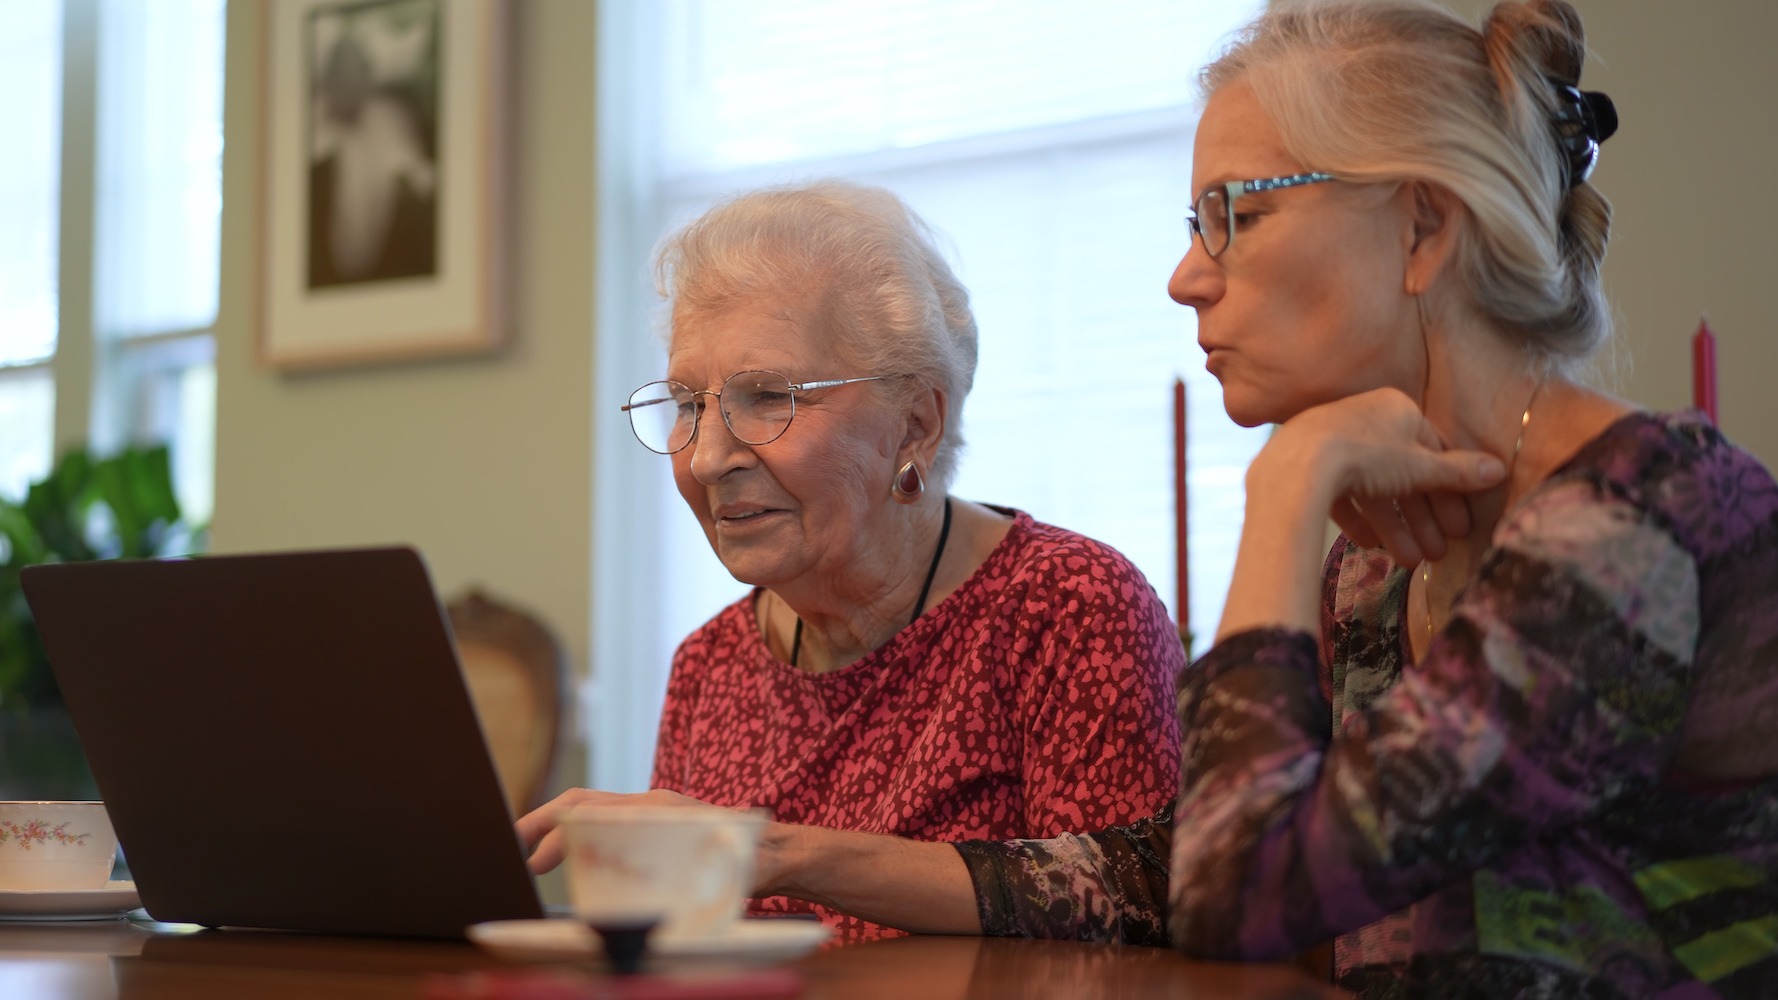 First Time Executor. Elderly woman sitting at table with her grown up daughter, looking at a computer laptop screen.